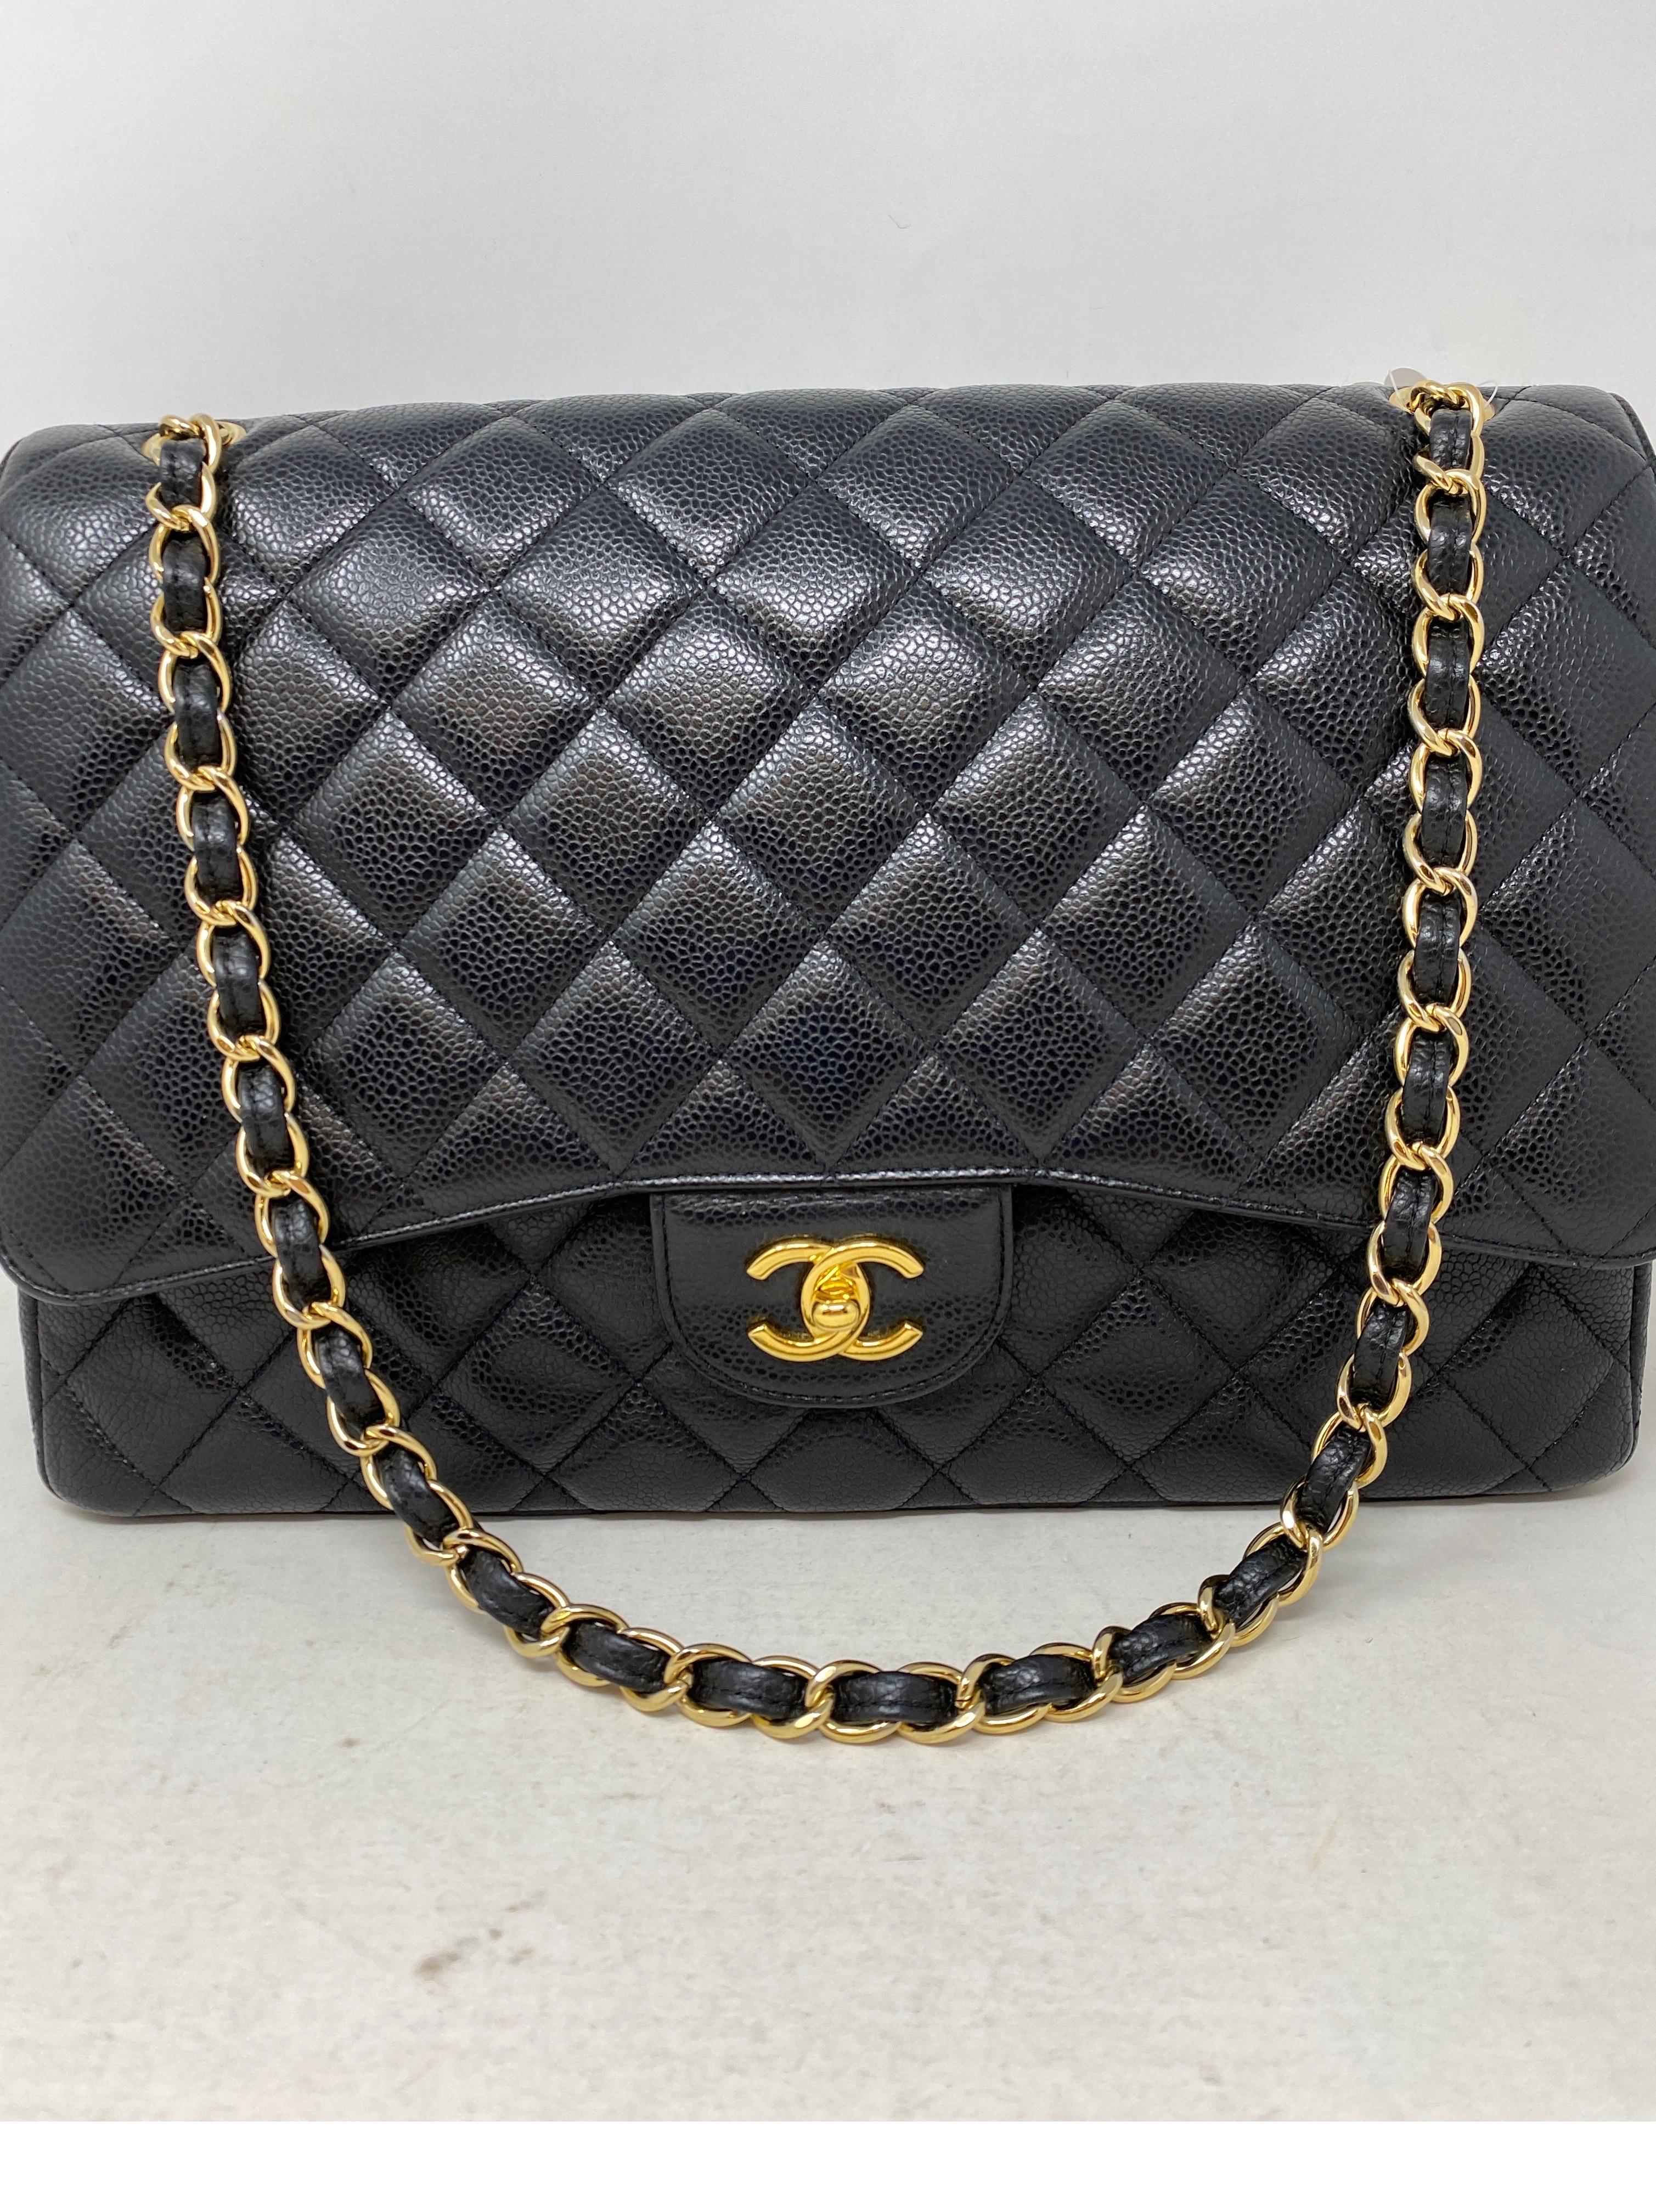 Chanel Black Maxi Single Flap Bag. Excellent condition. Gold hardware. Hard to find single flap. Caviar leather. Interior pristine. Bag is priced to sell. Guaranteed authentic. 